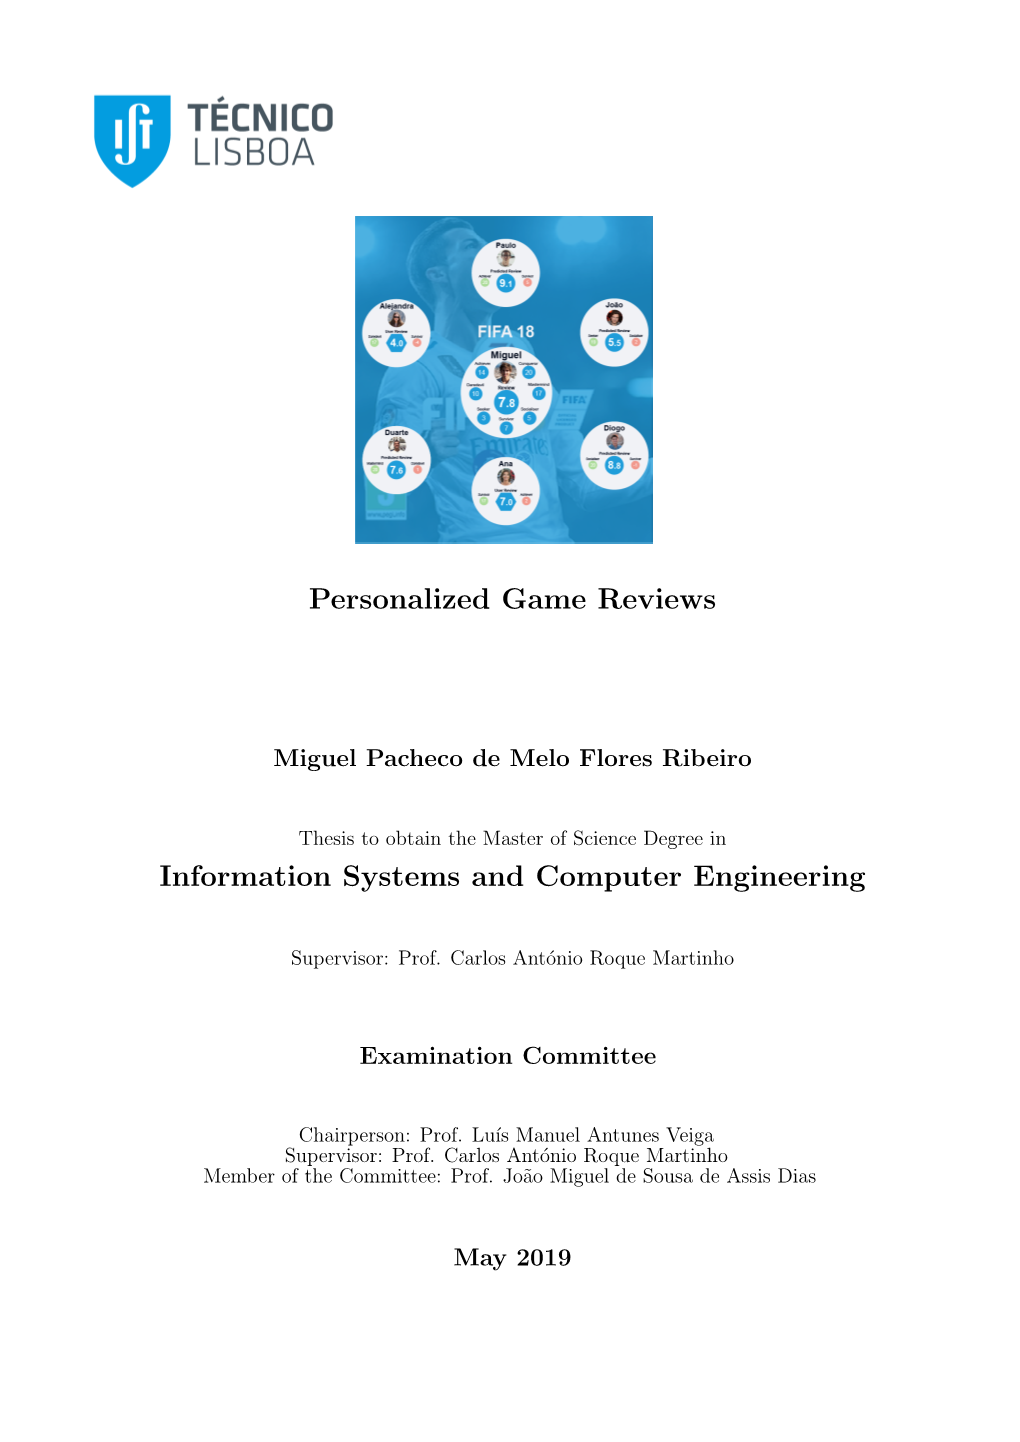 Personalized Game Reviews Information Systems and Computer